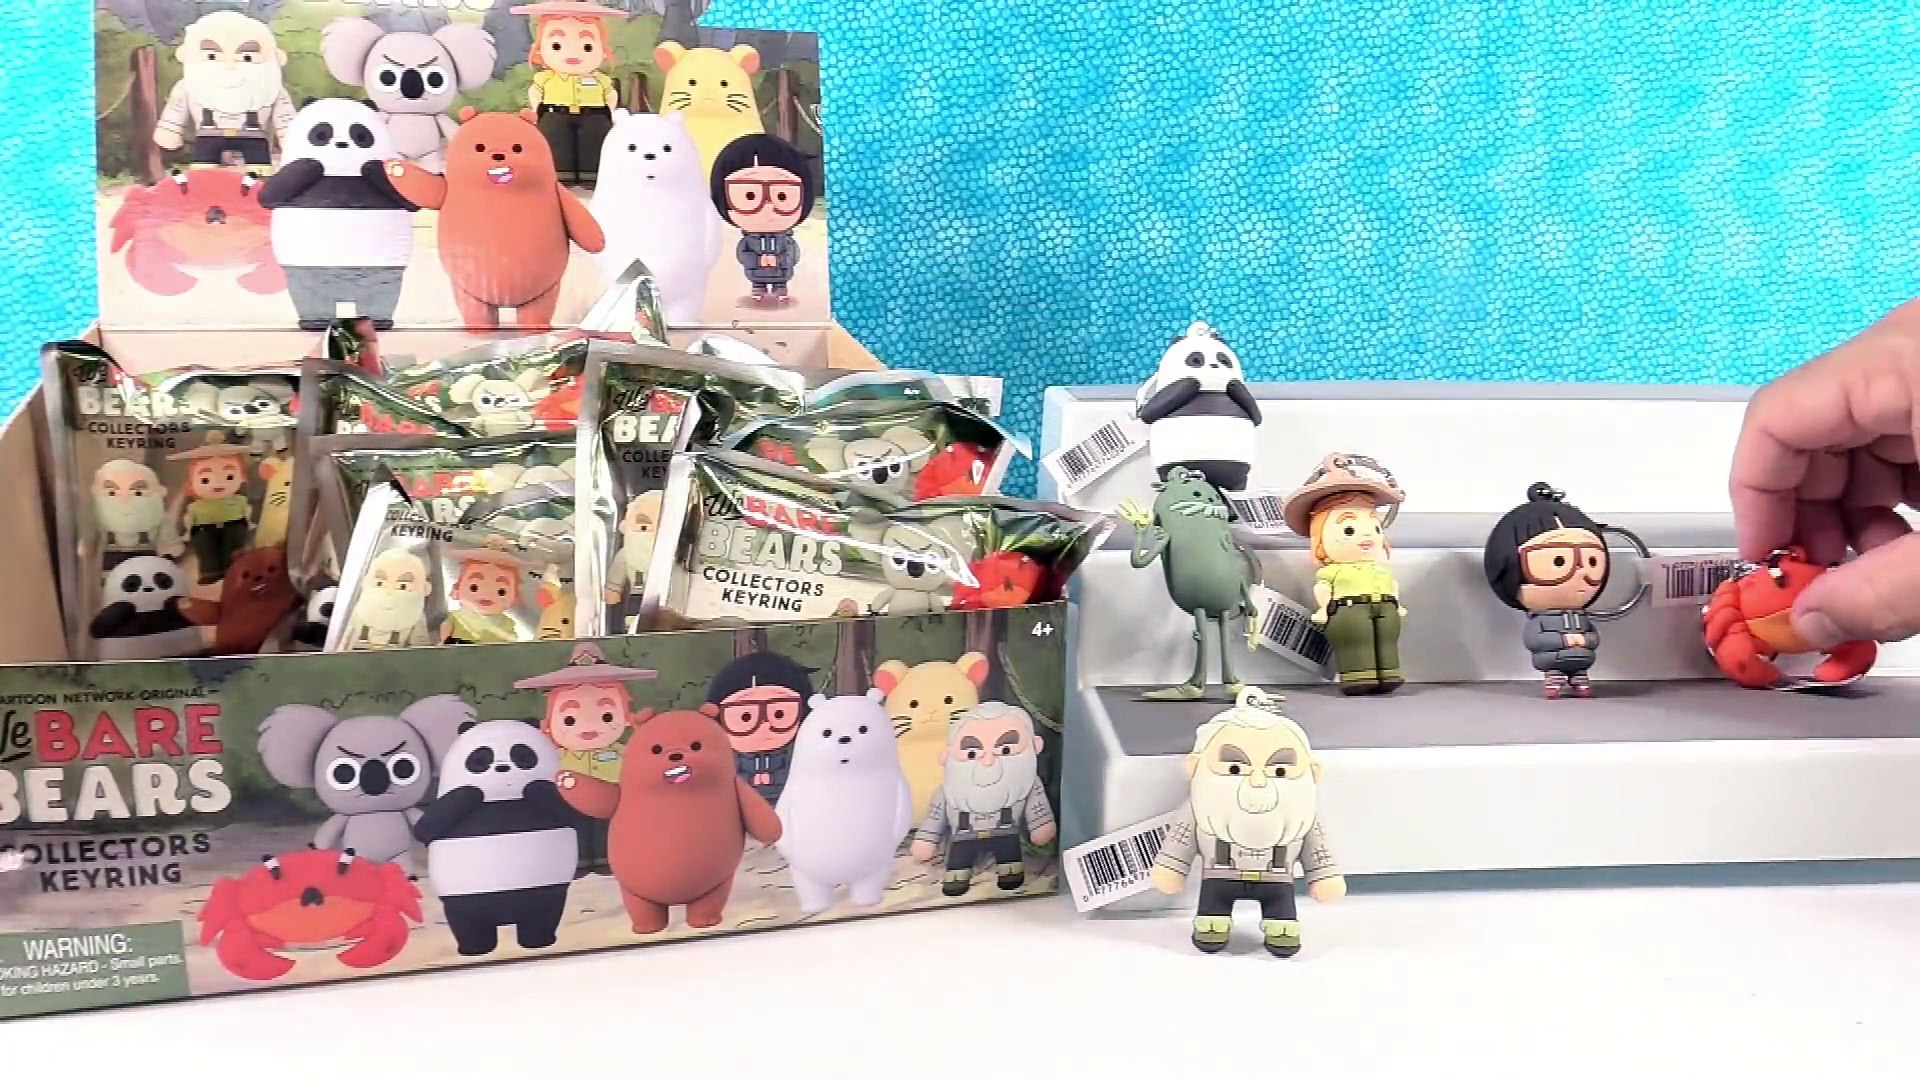 We Bare Bears Collector Keyrings CN Full Box Blind Bag Opening Review _  PSToyReviews - Video Dailymotion